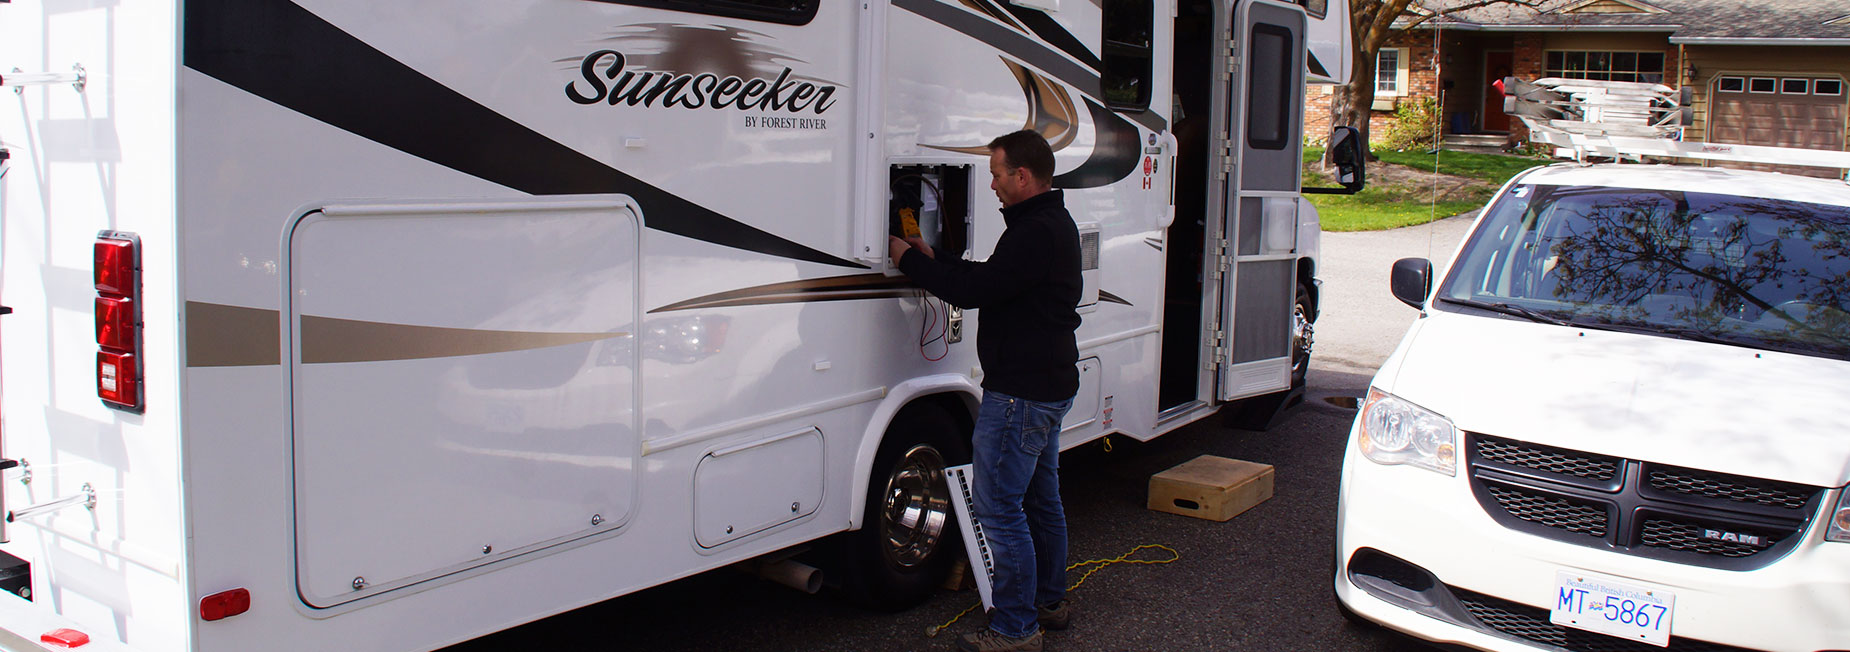 Keystone RV Services in Kelowna offers a comprehensive inspection service to get you ready for your camping adventures.